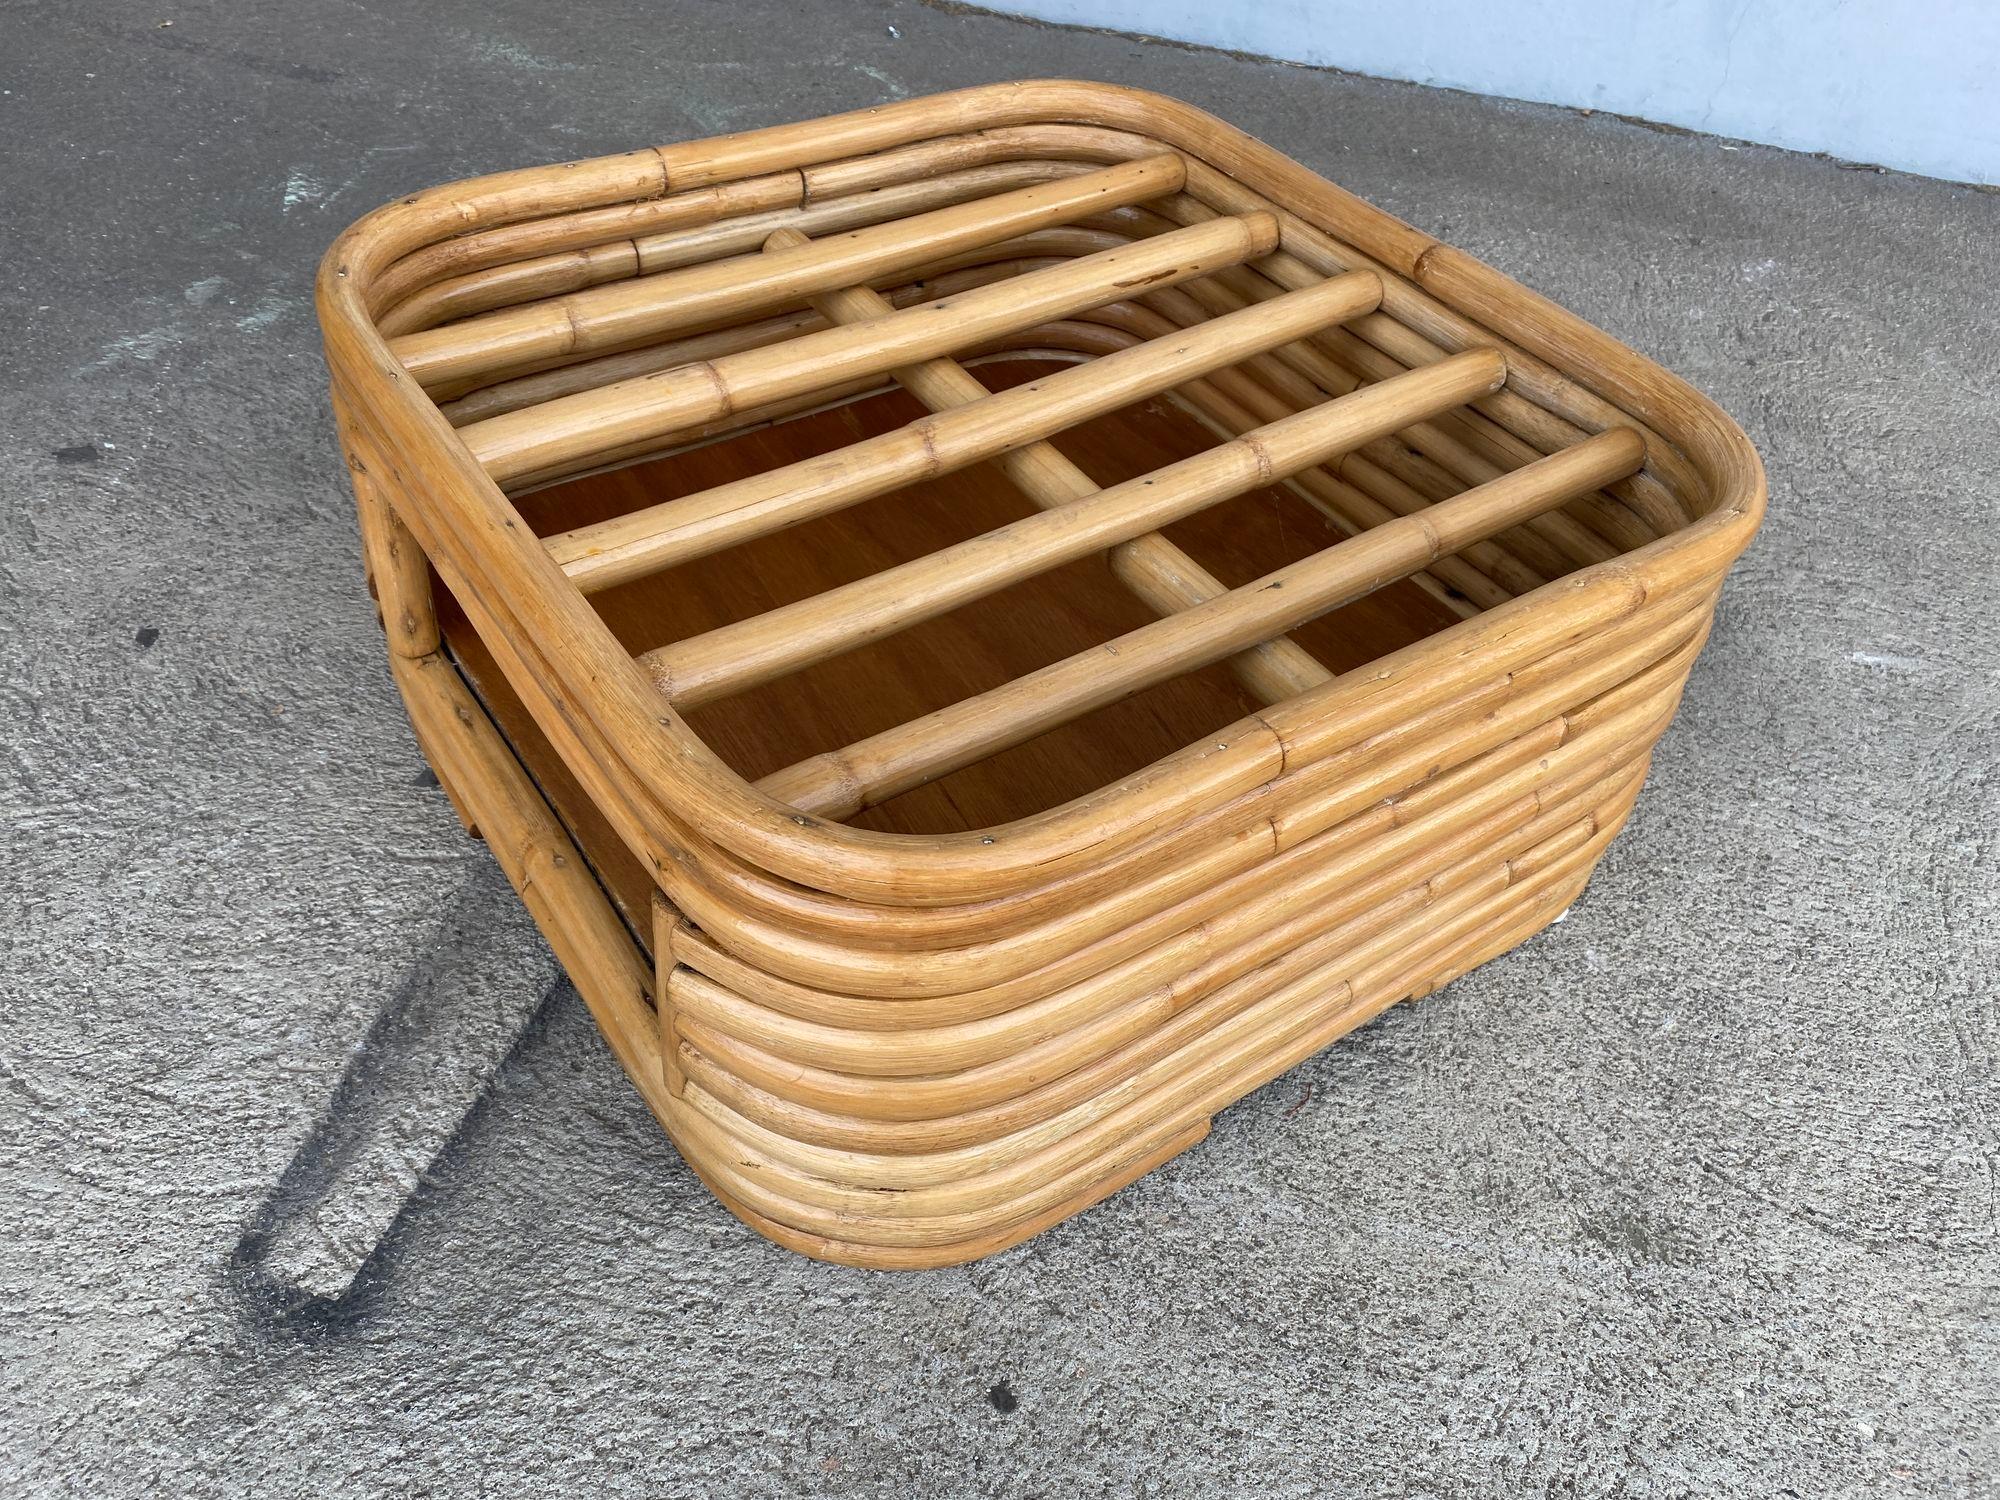 Restored Stacked Rattan Footrest Ottoman with Cubby Space In Excellent Condition For Sale In Van Nuys, CA